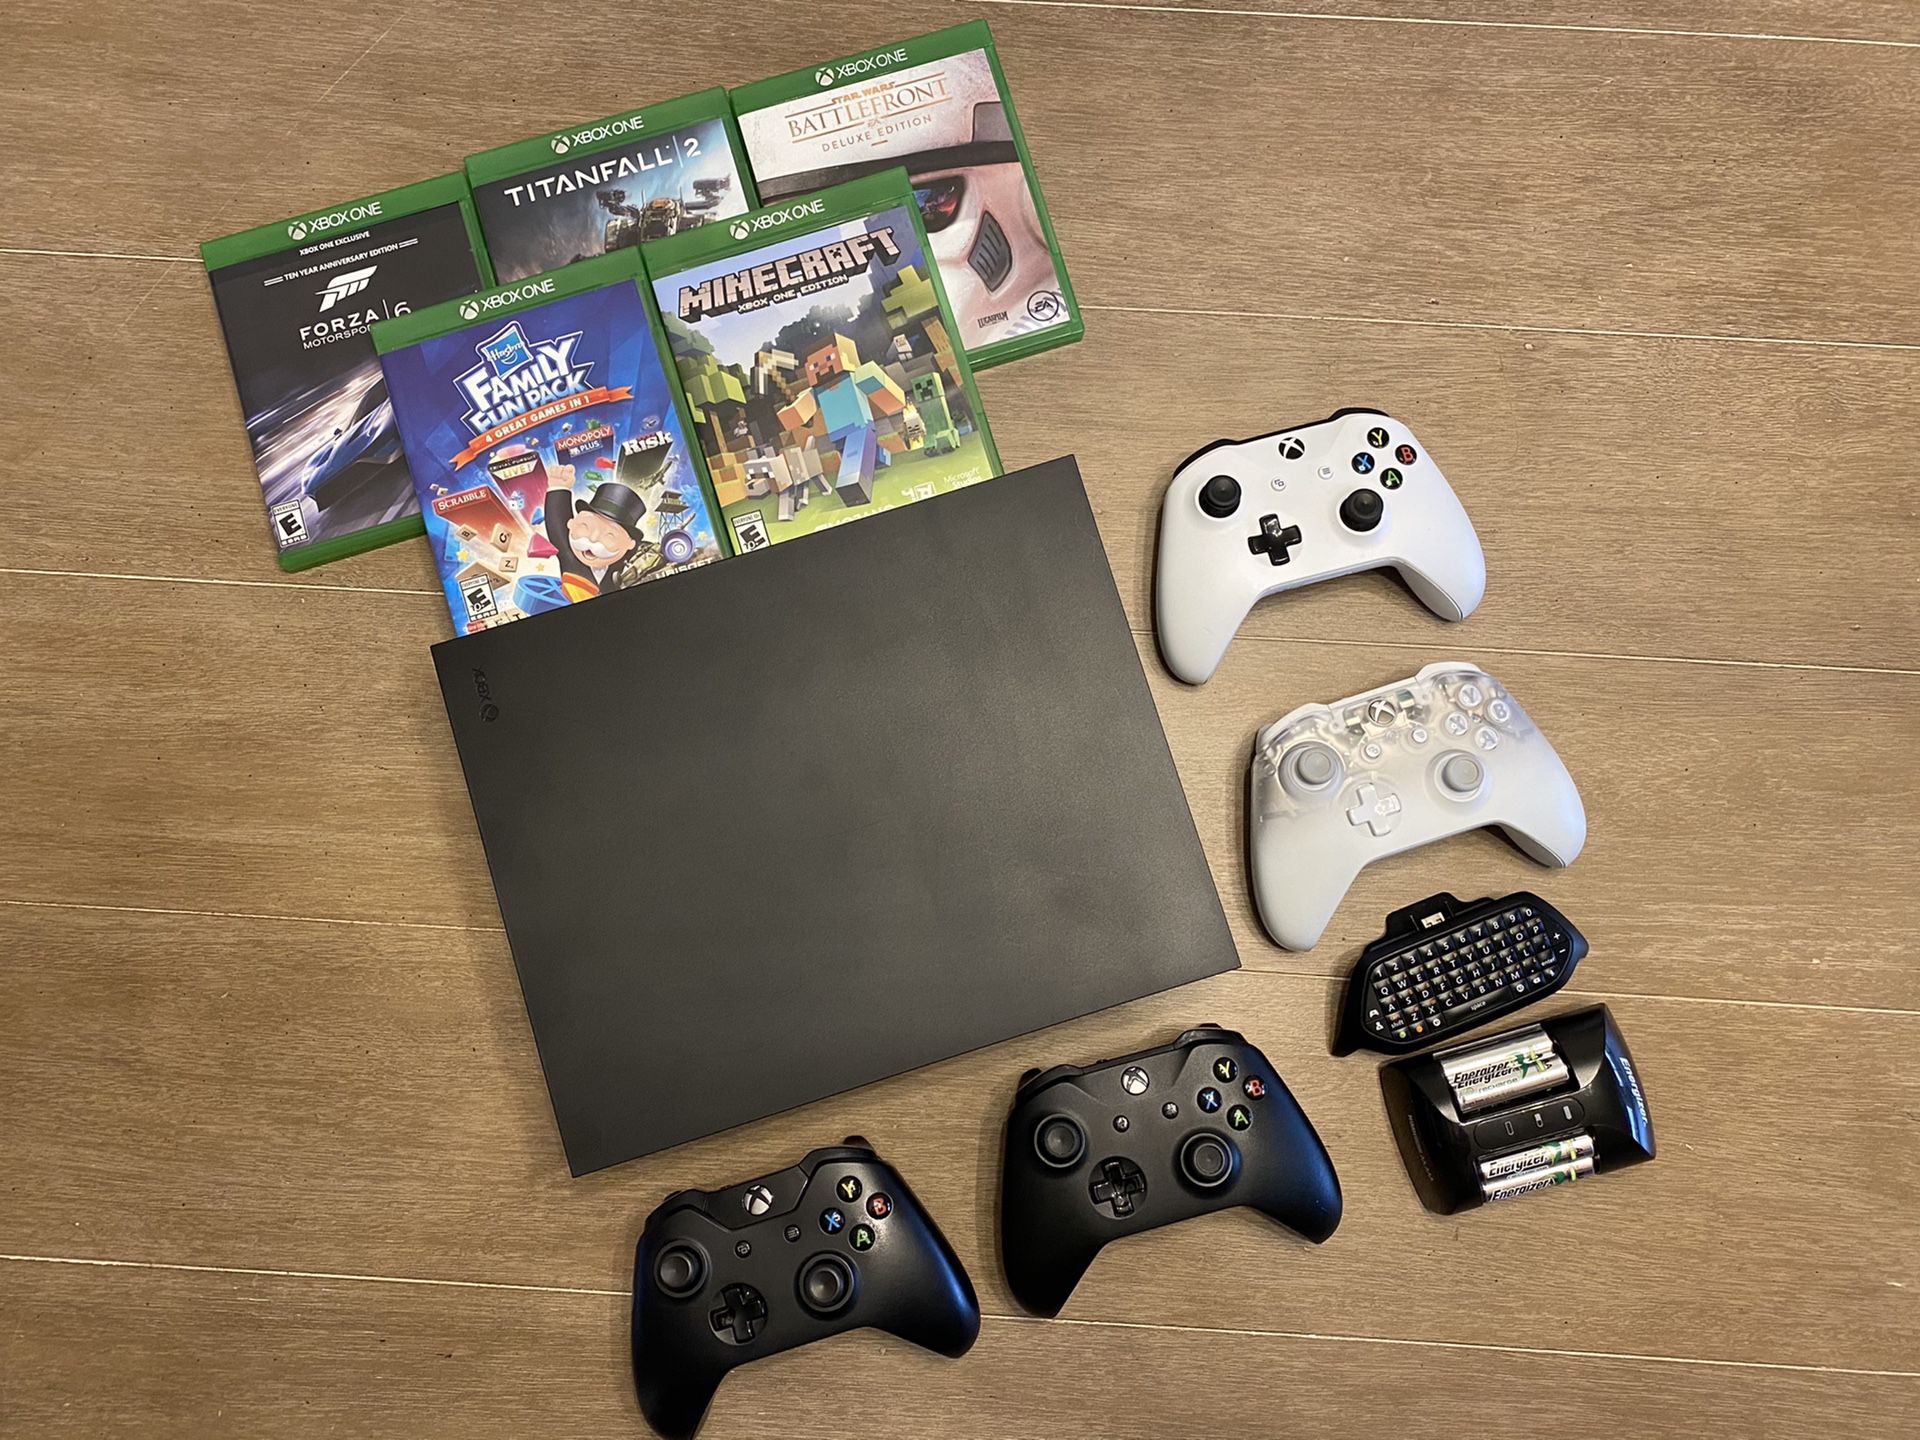 Xbox One X, four controllers, FIVE games, chat pad, and more!